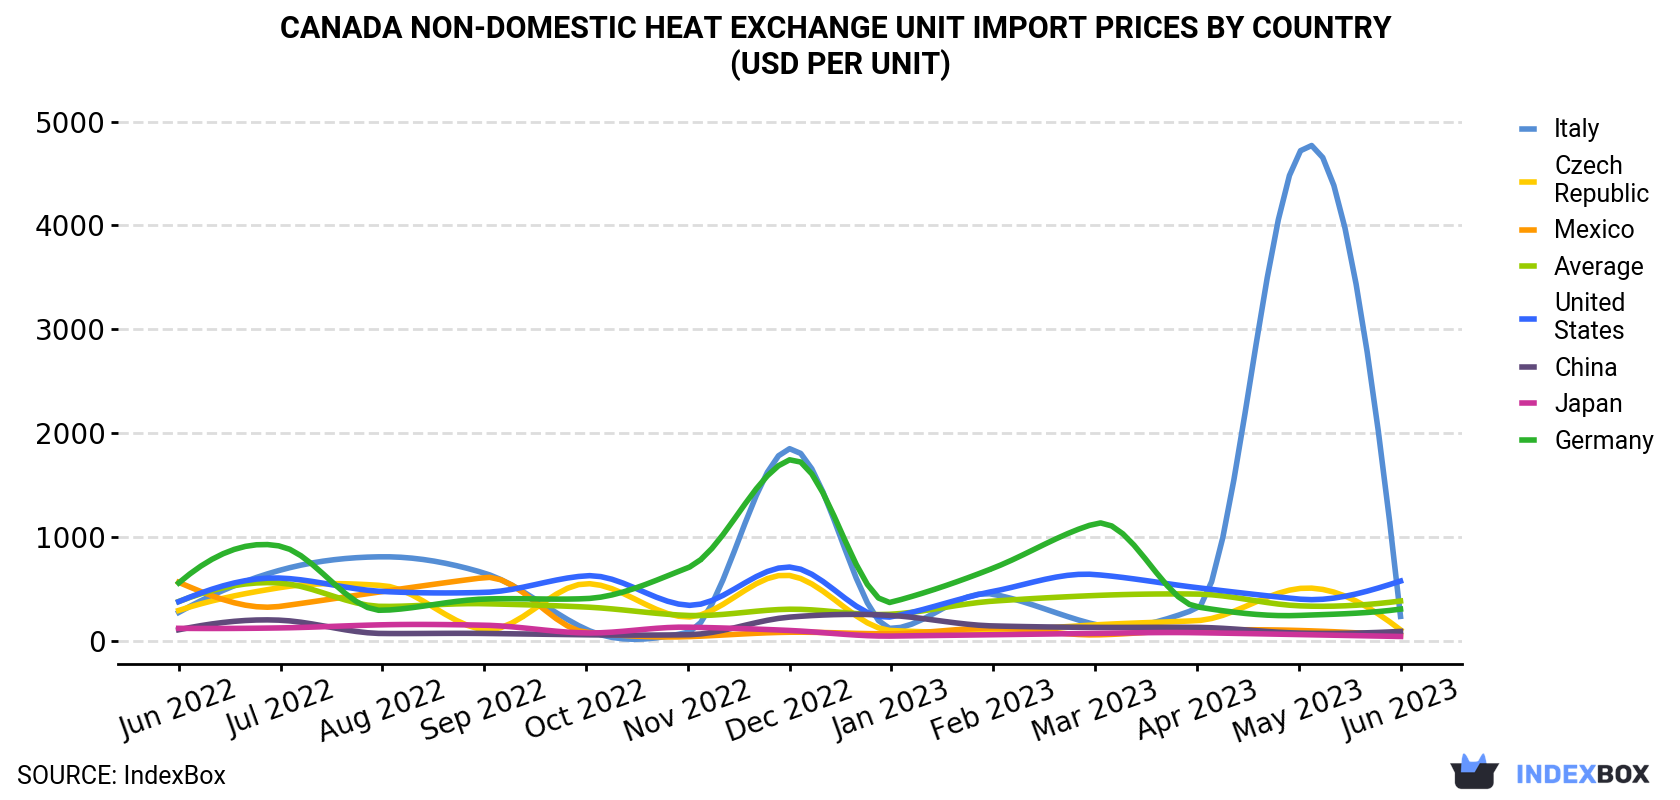 Canada Non-Domestic Heat Exchange Unit Import Prices By Country (USD Per Unit)